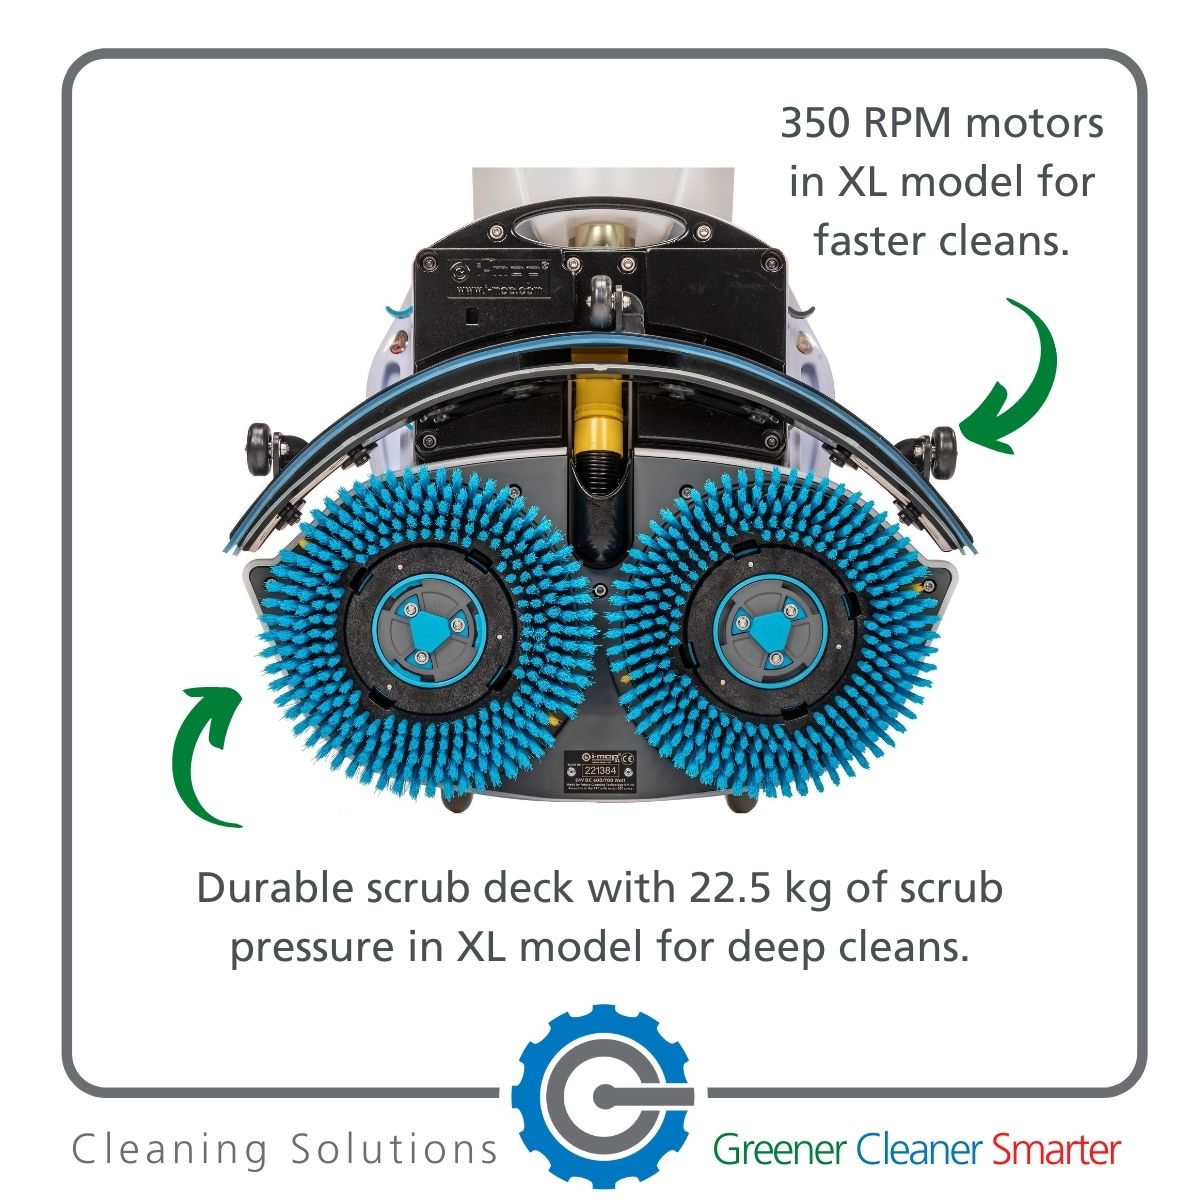 i-mop product features #3 - 350 RPM motor, durable scrub deck and 22.5kg scrub pressure